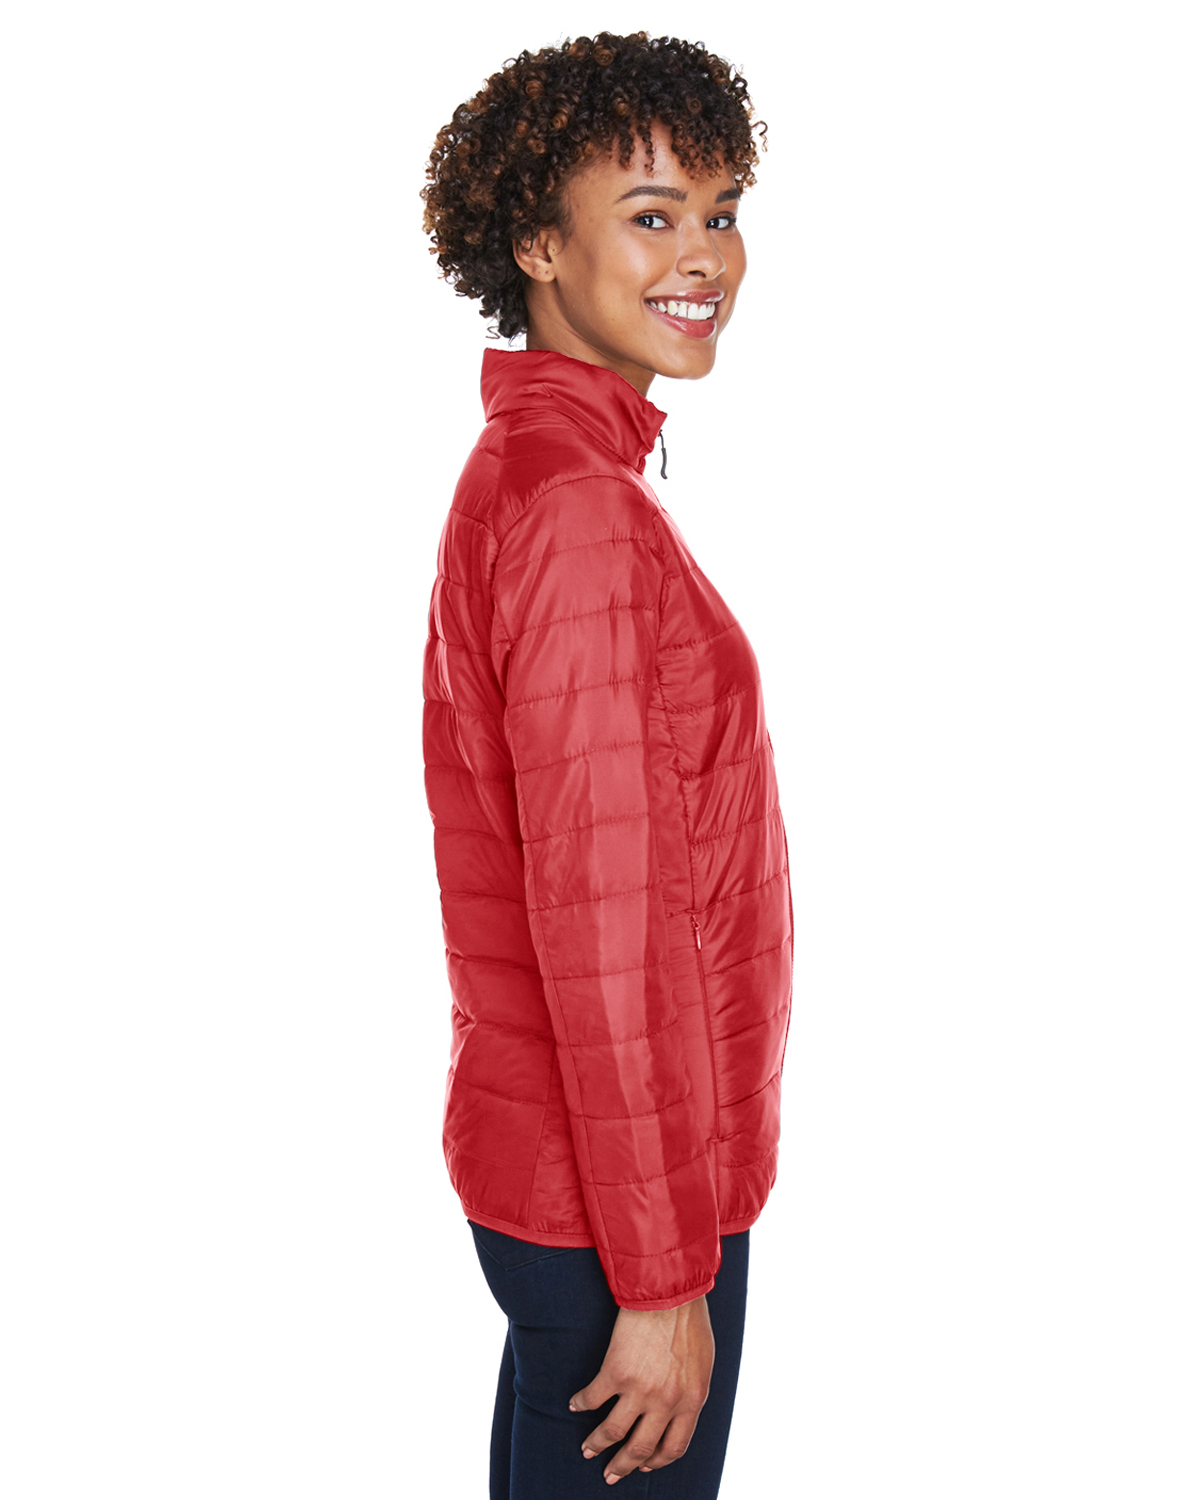 Ladies' Prevail Packable Puffer Jacket - CLASSIC RED - L - image 3 of 3